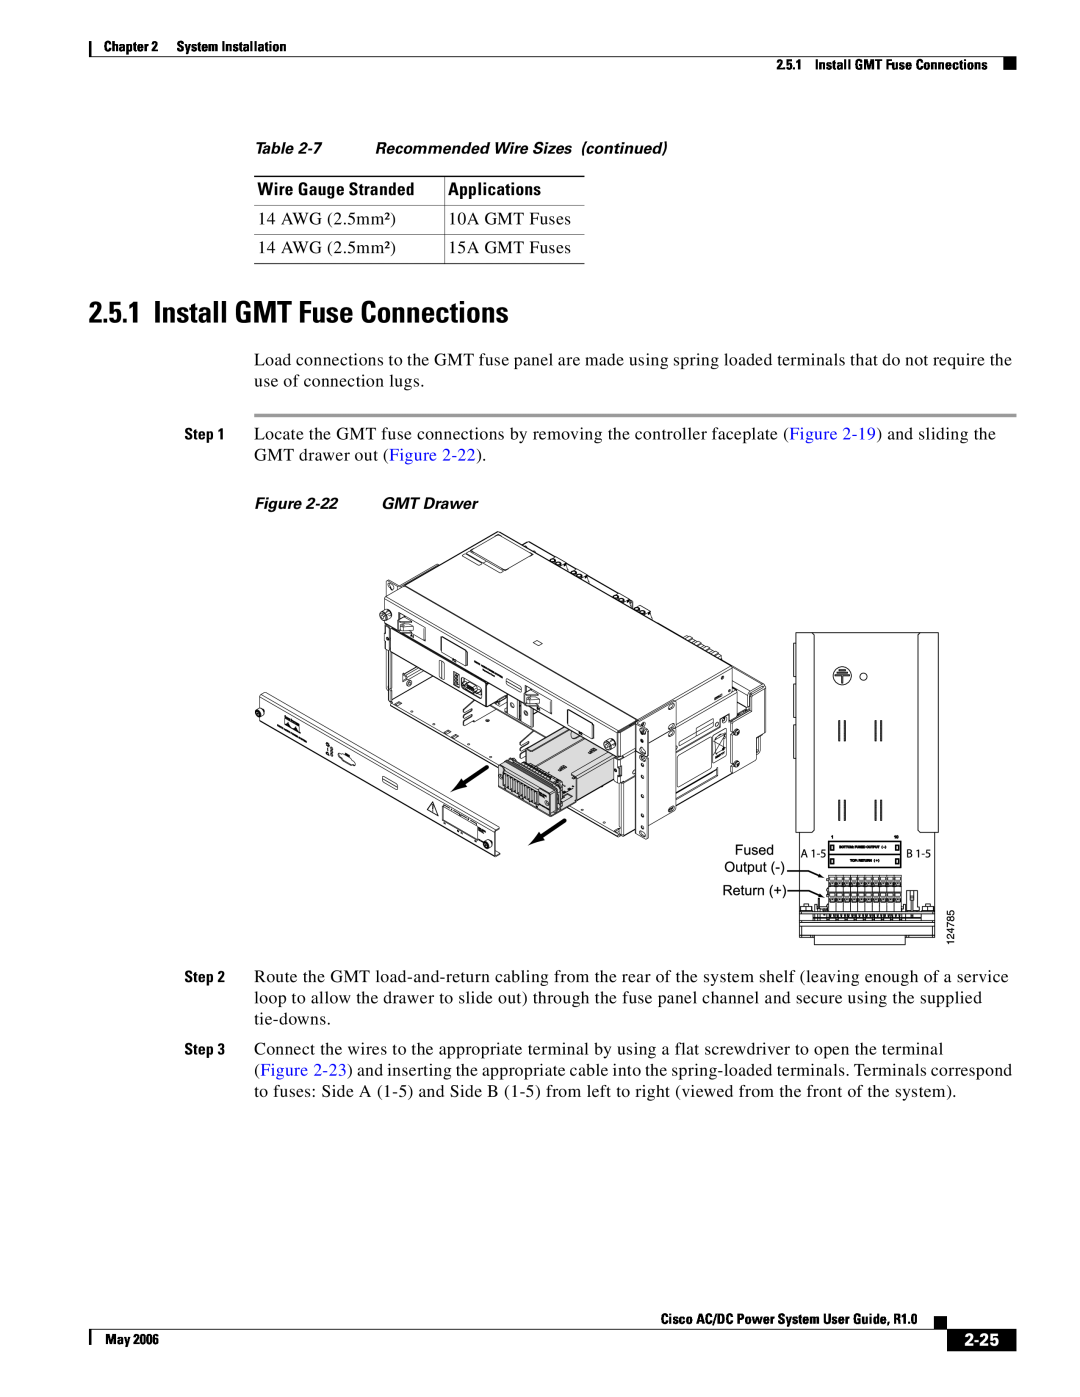 Cisco Systems 159330, 124792, 124778 manual Install GMT Fuse Connections, 2-25, 7 Recommended Wire Sizes continued 